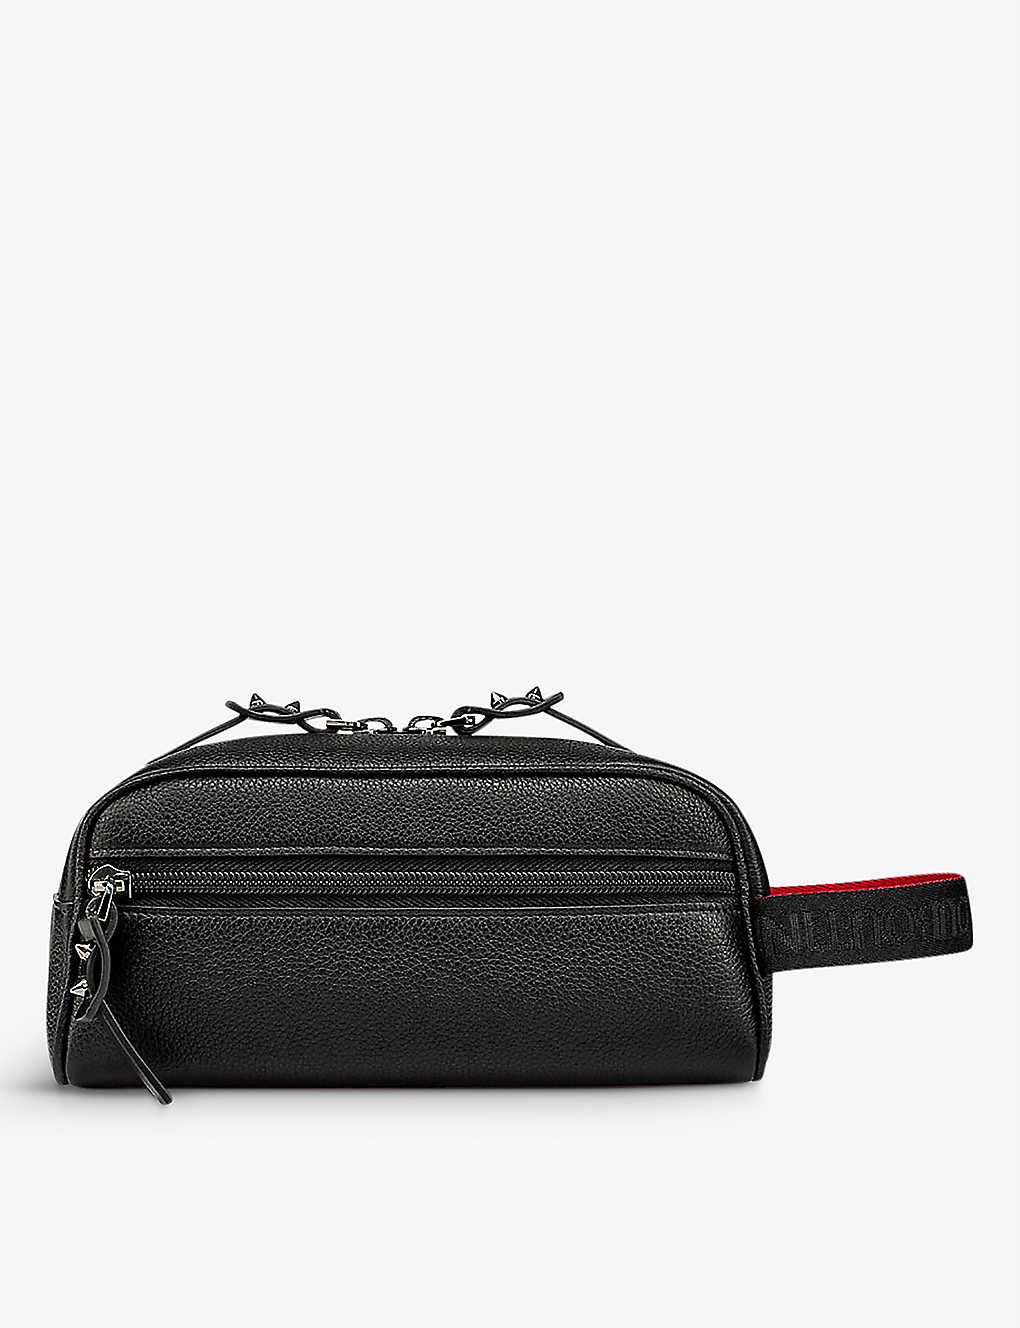 Christian Louboutin Black/black Blaster Spike-embellished Leather Pouch